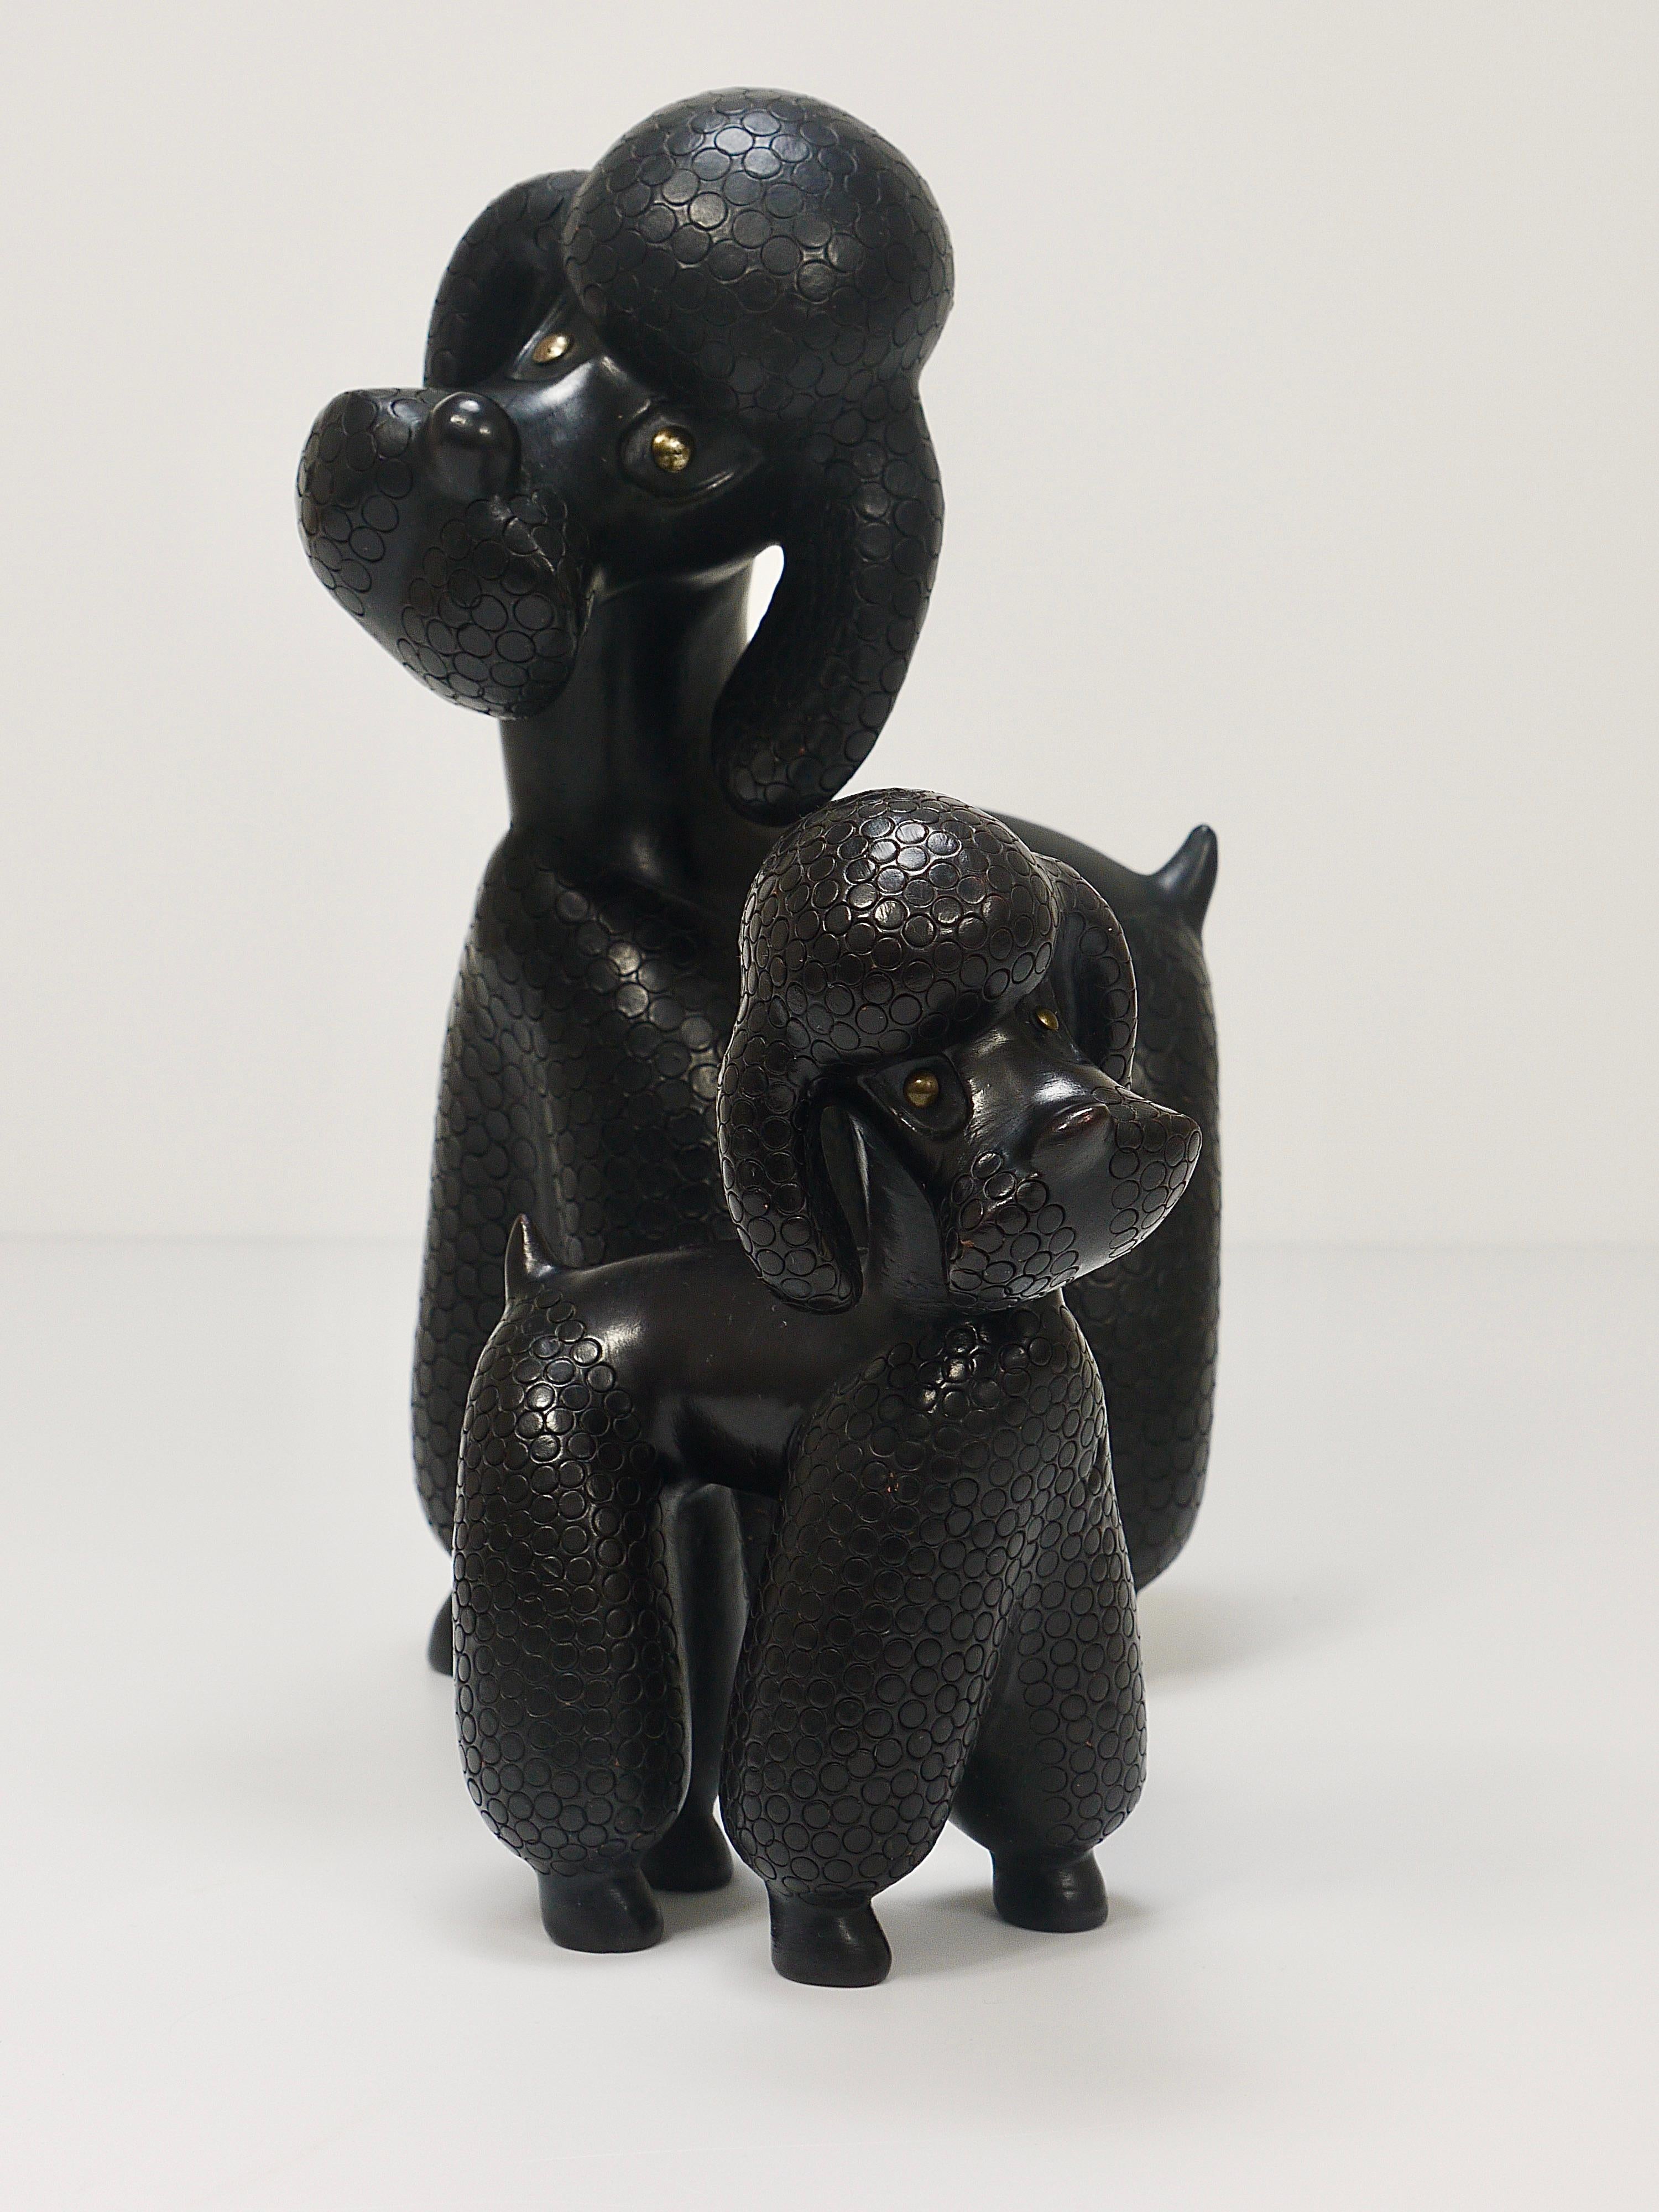 A pair of two lovely detailed Midcentury poodle figurines, called „Peggy